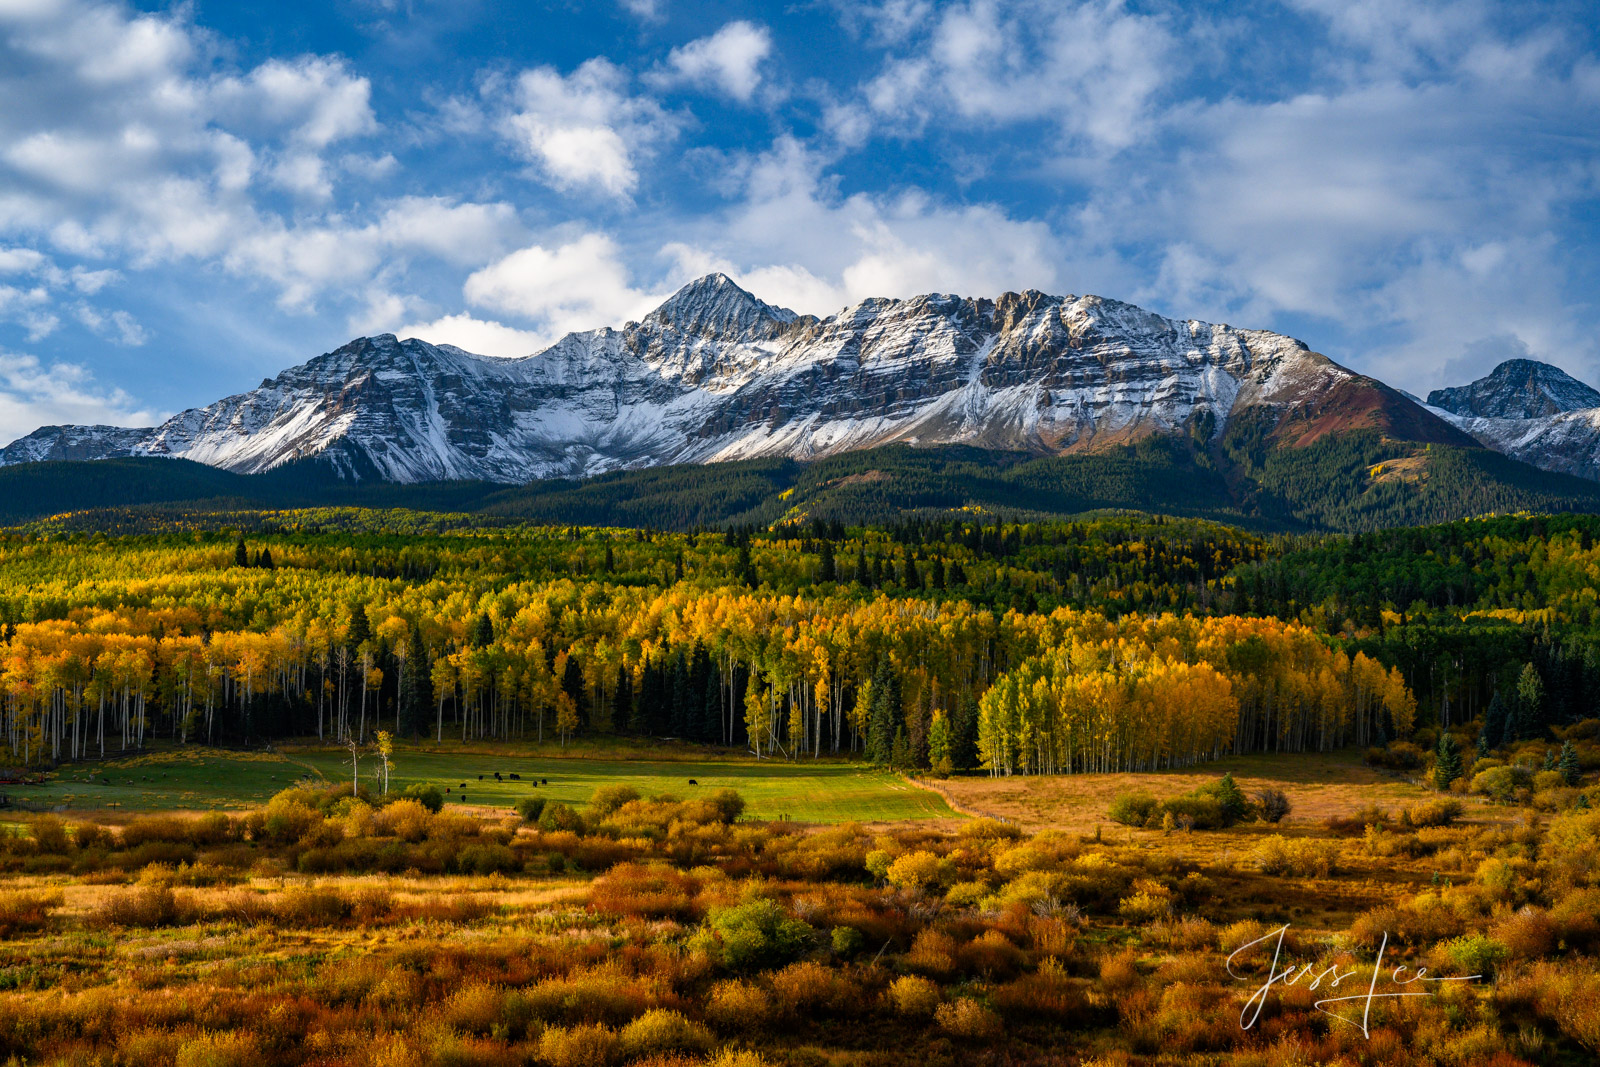 Colorado Picture and Landscape Photography. Photo